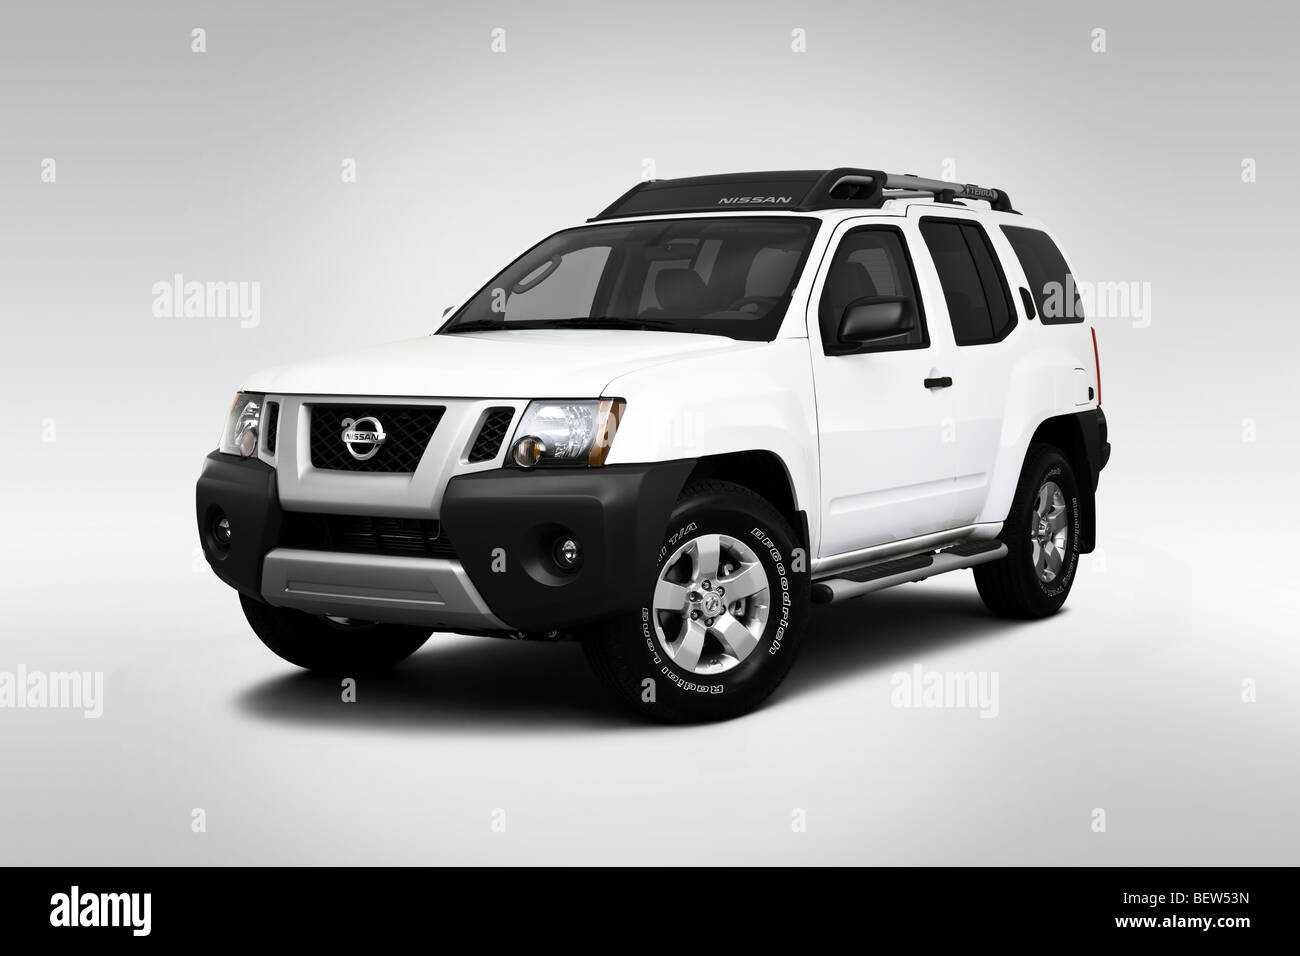 2010 Nissan Xterra S in White - Front angle view Stock Photo - Alamy